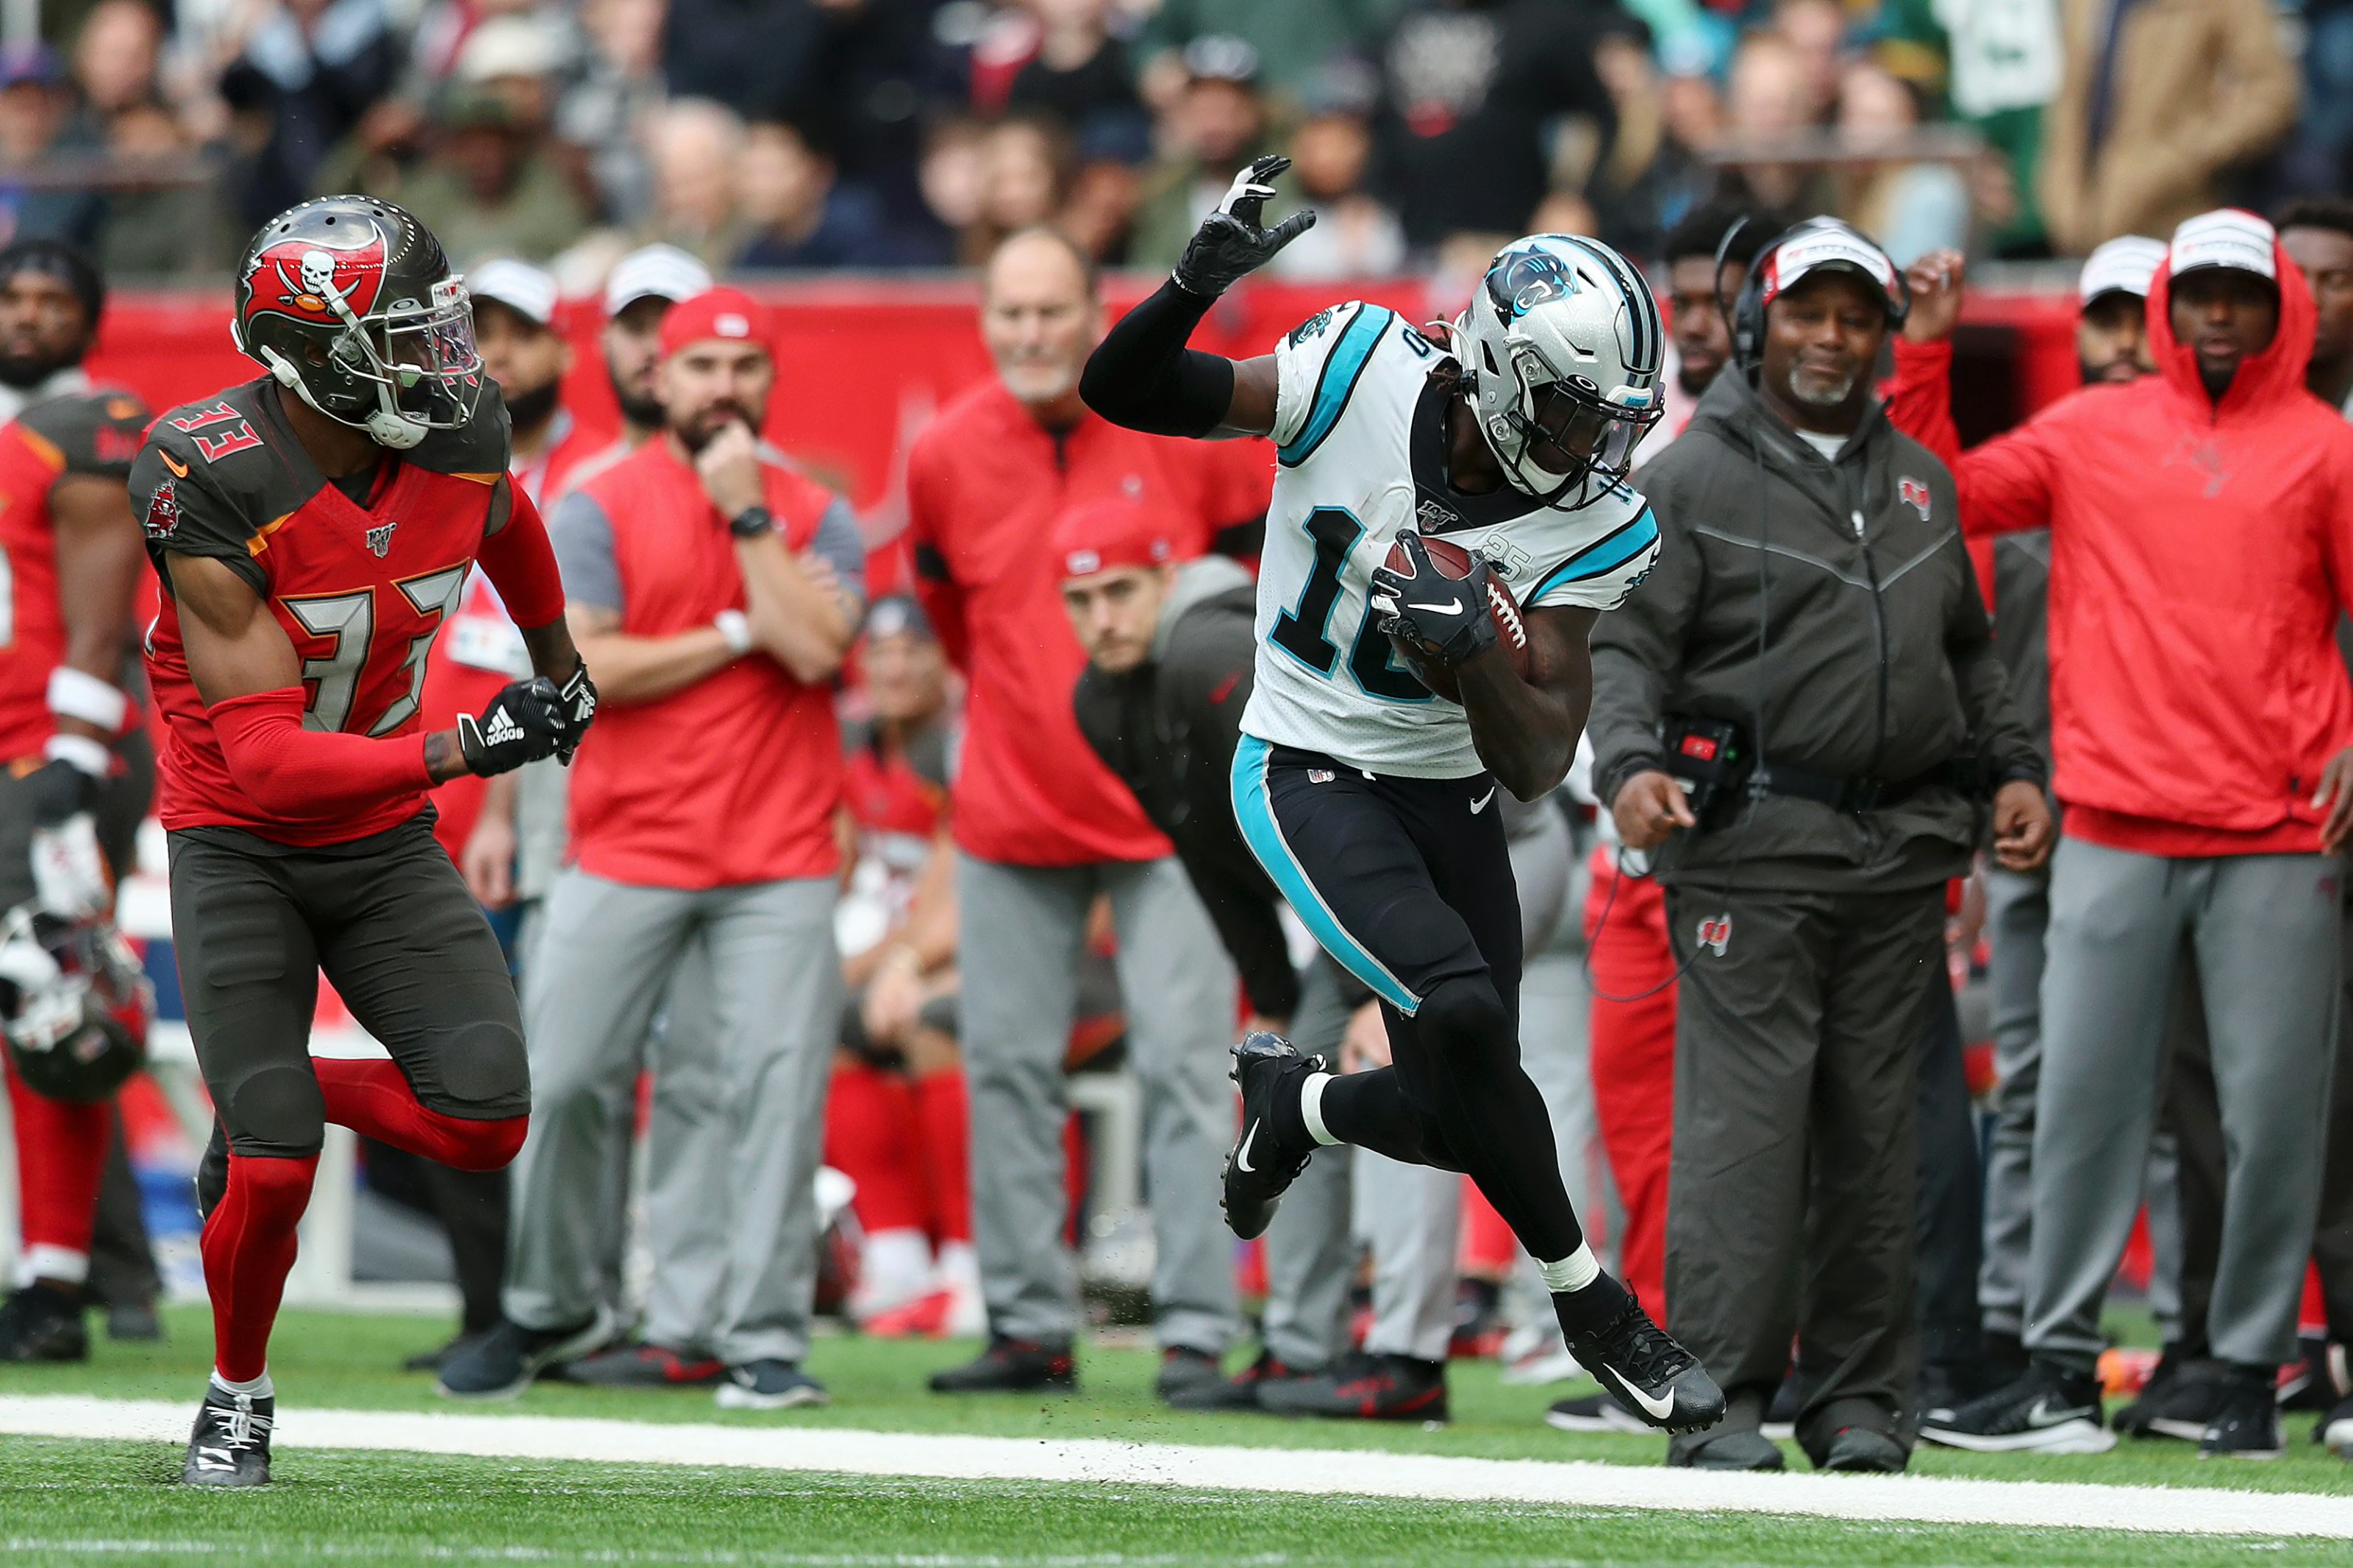 Ohio State Football: Curtis Samuel dazzles in week 6 of the NFL season